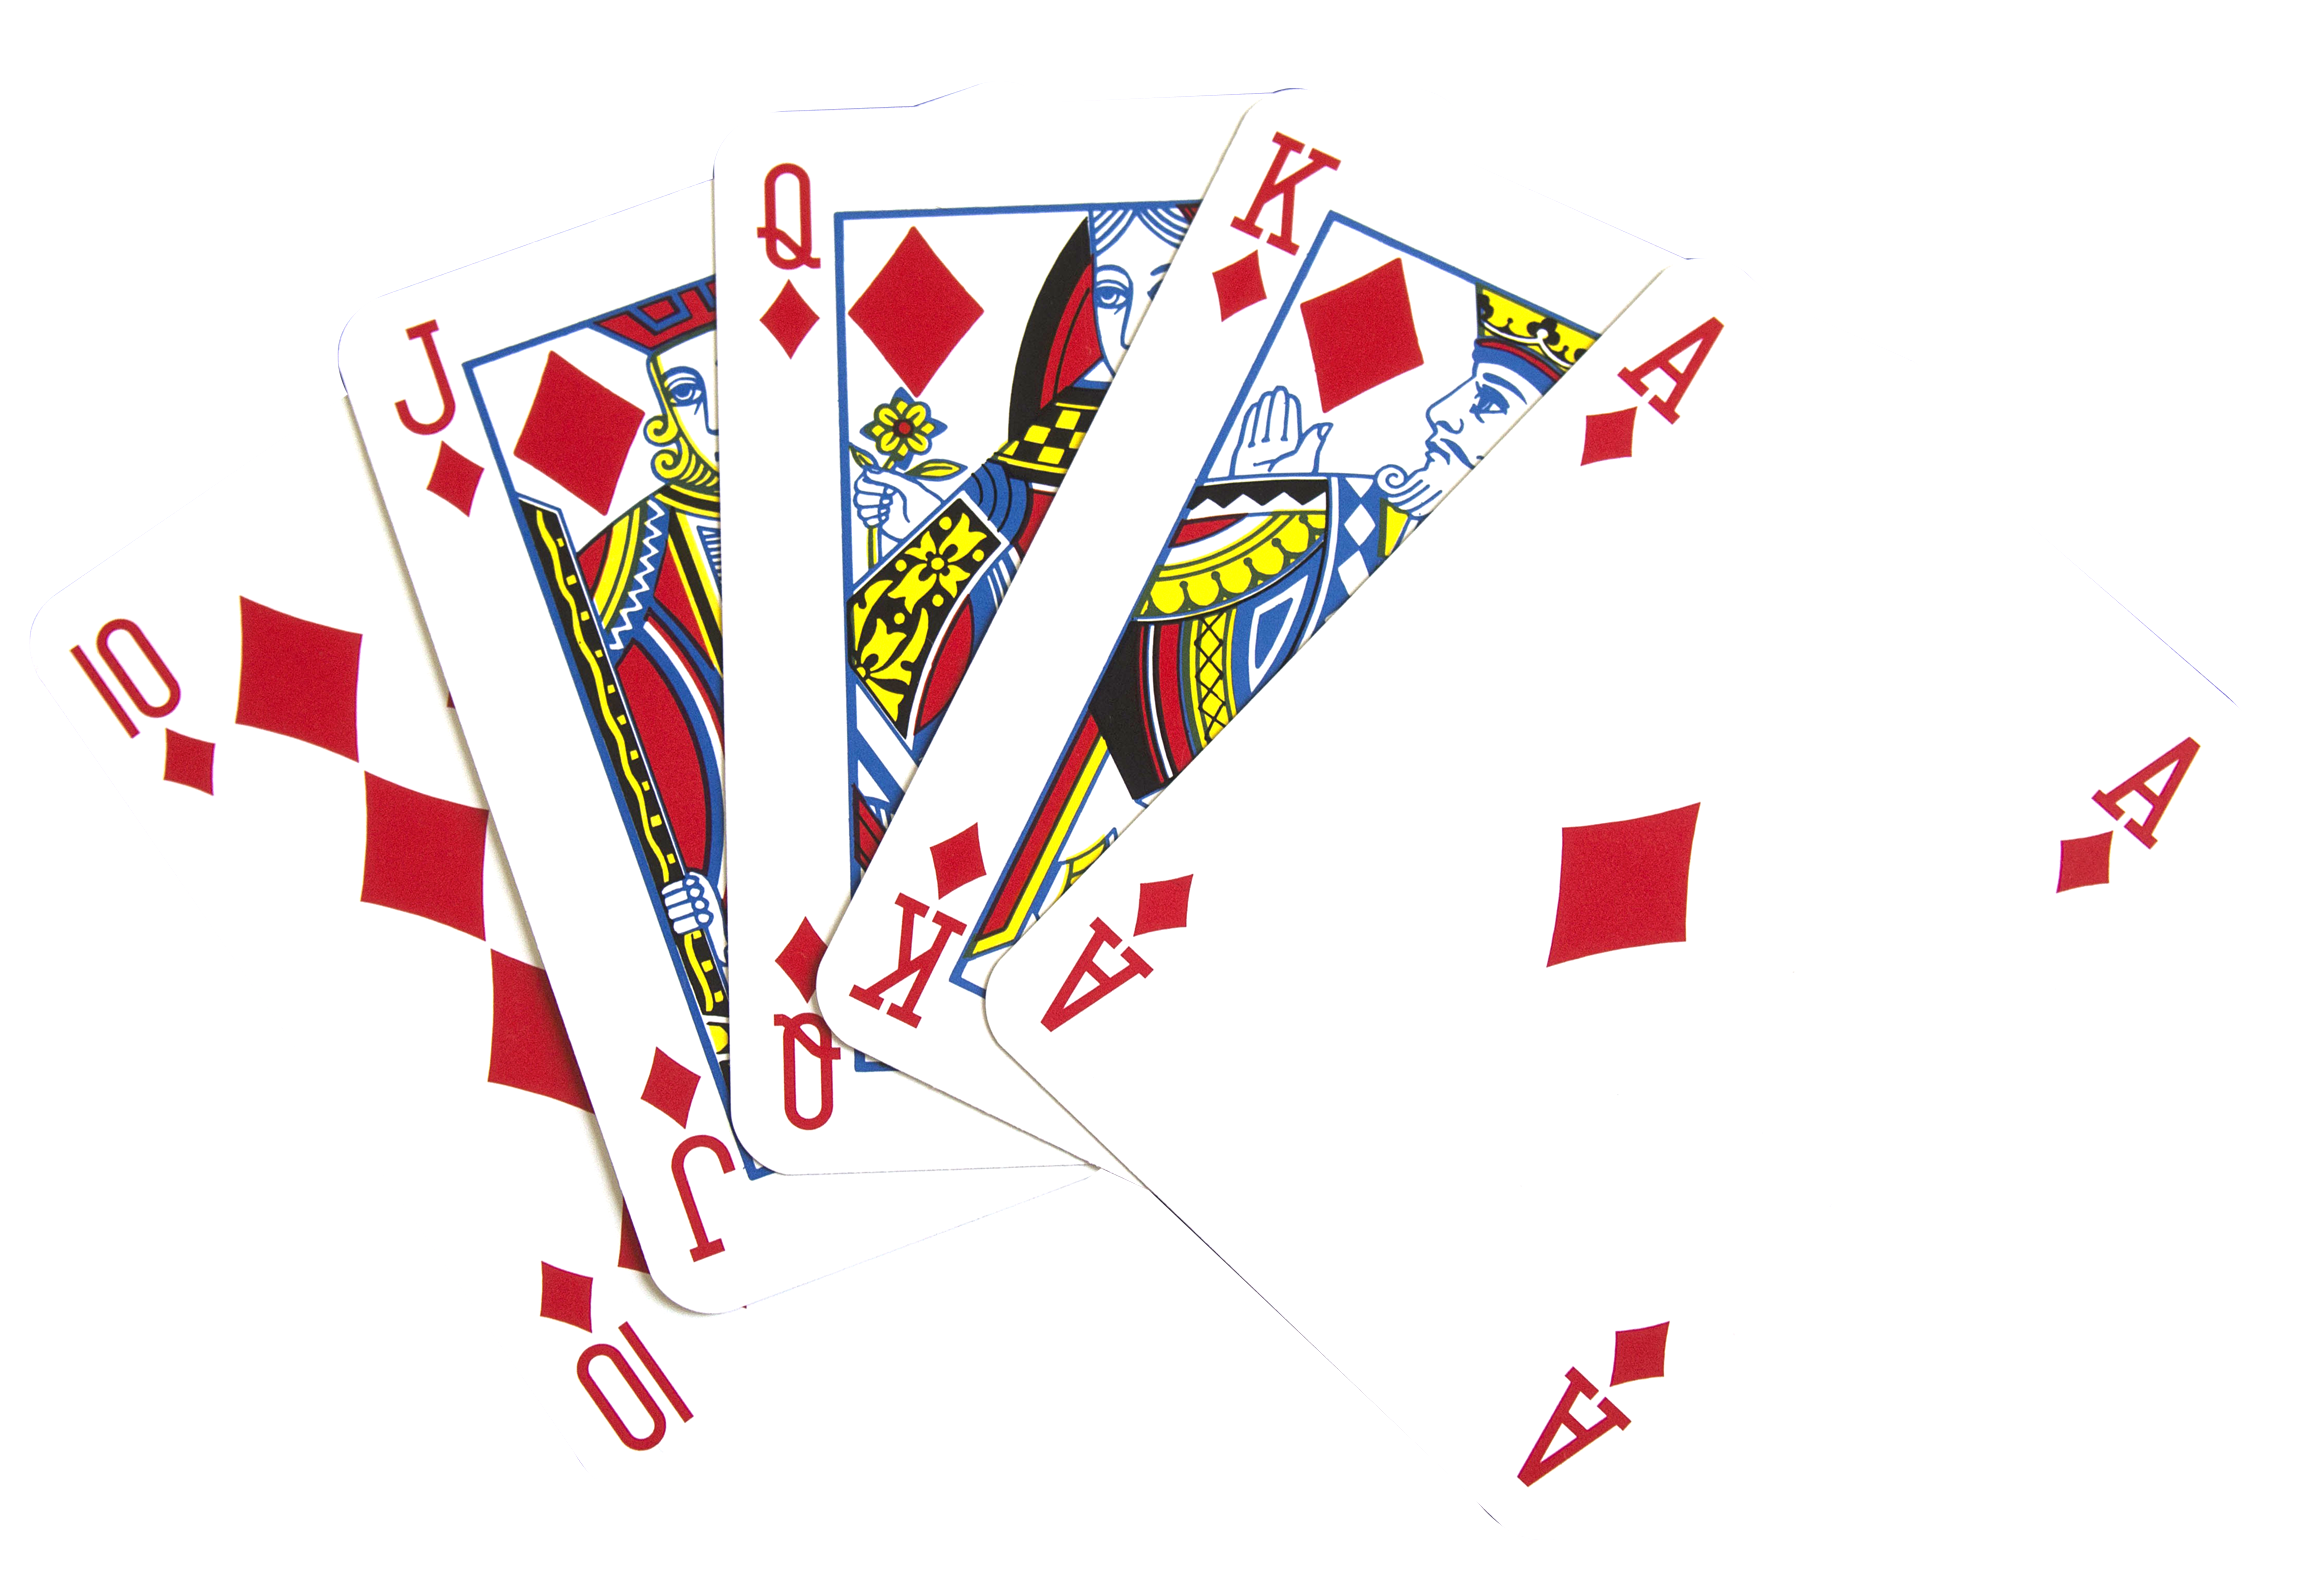 PlusPNG - Cards PNG